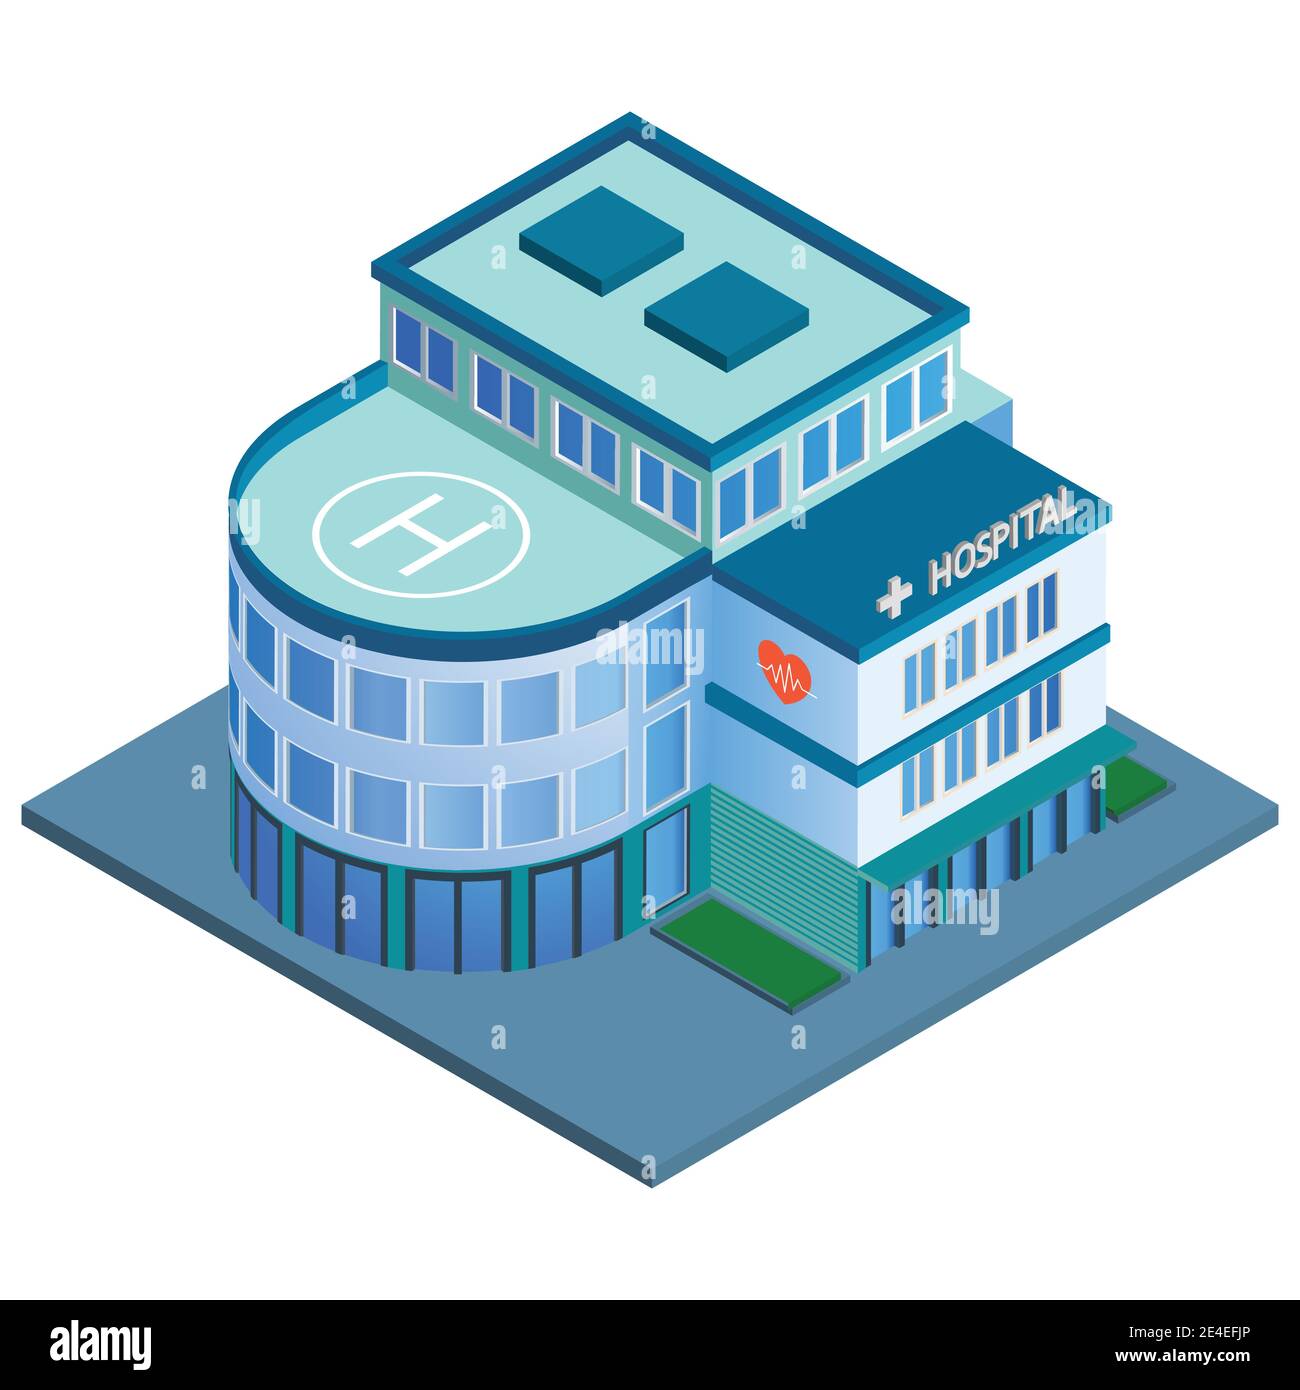 Modern 3d urban hospital building with helipad on the roof isometric isolated vector illustration Stock Vector